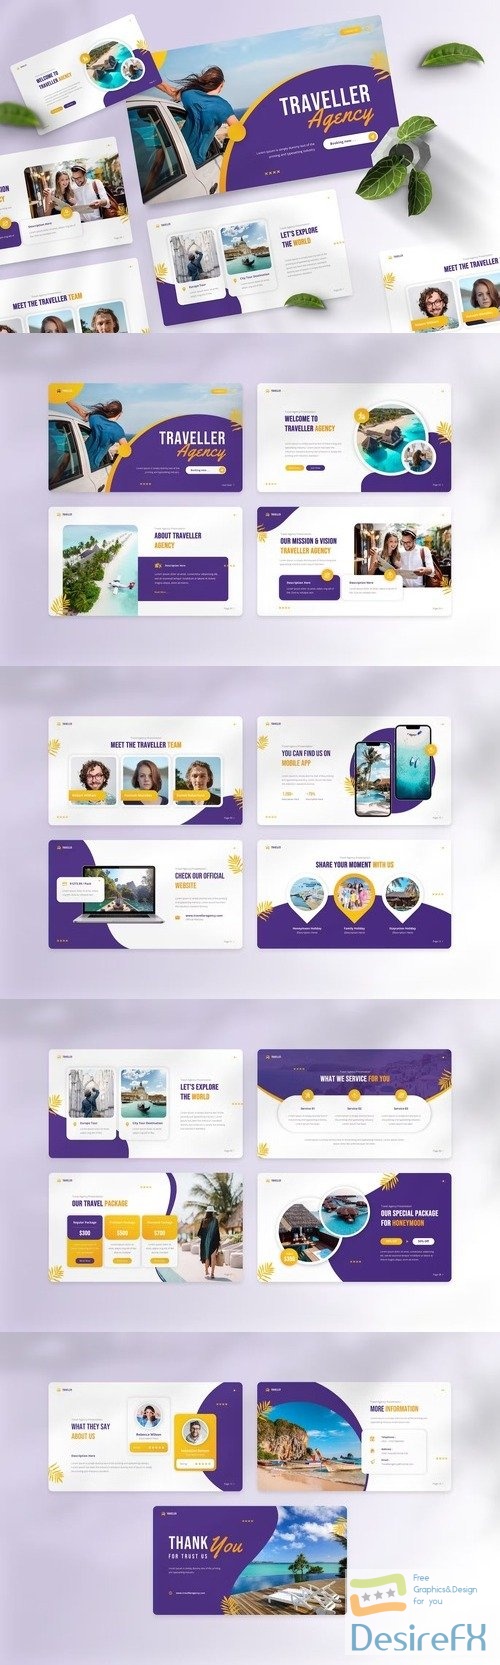 Traveller - Travel Agency Powerpoint Template